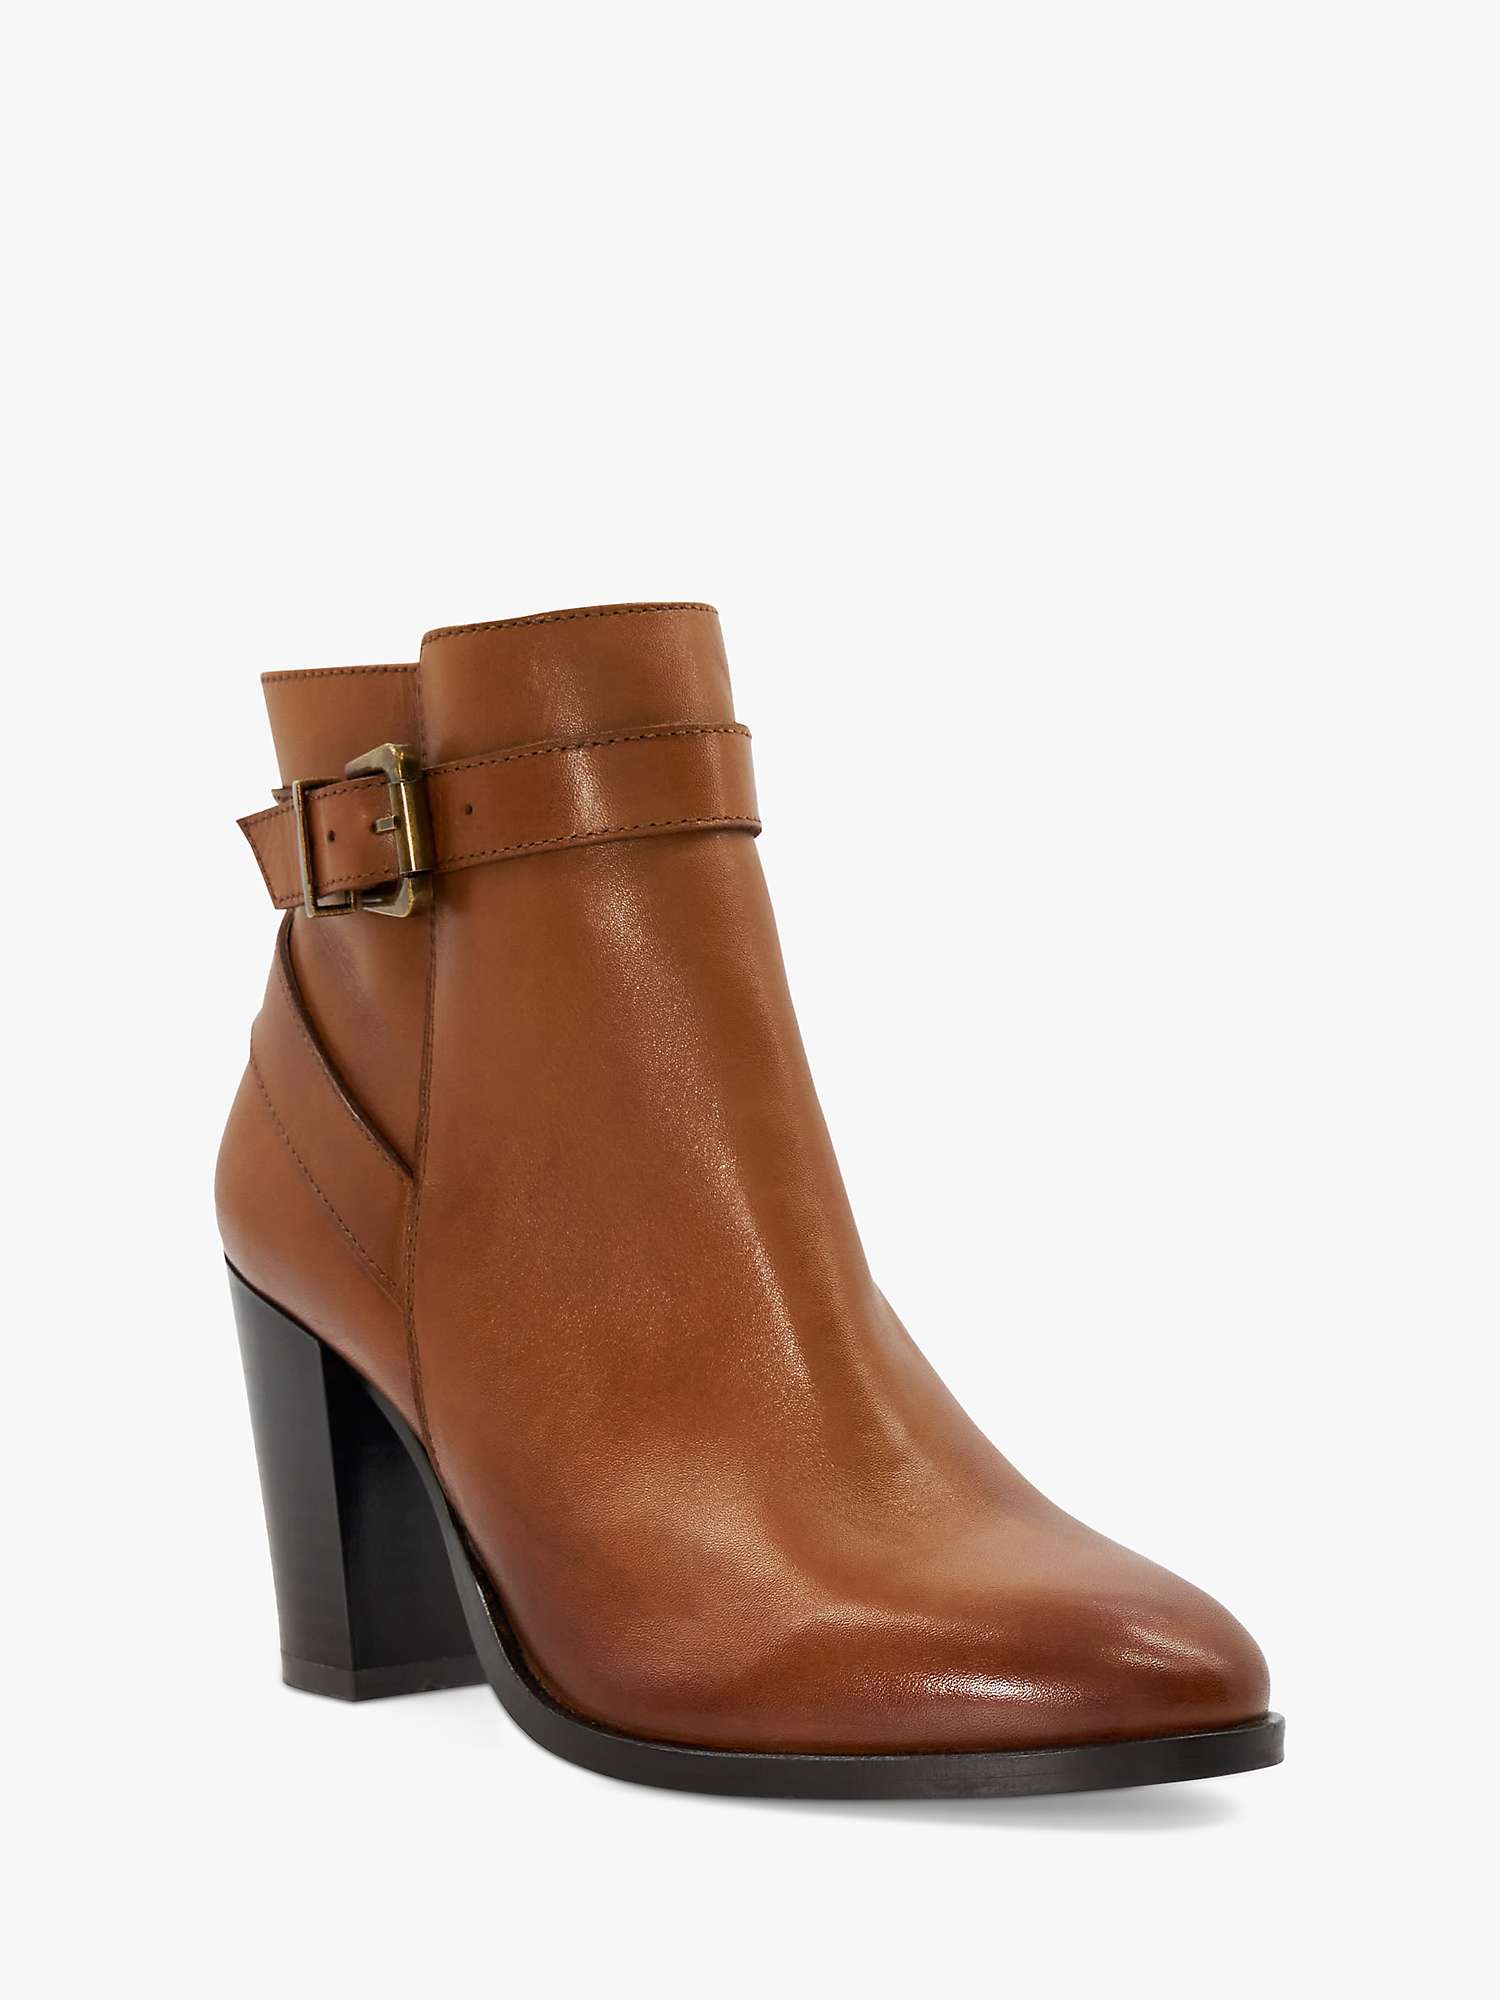 Buy Dune Philippa 2 Leather Block Heel Ankle Boots Online at johnlewis.com